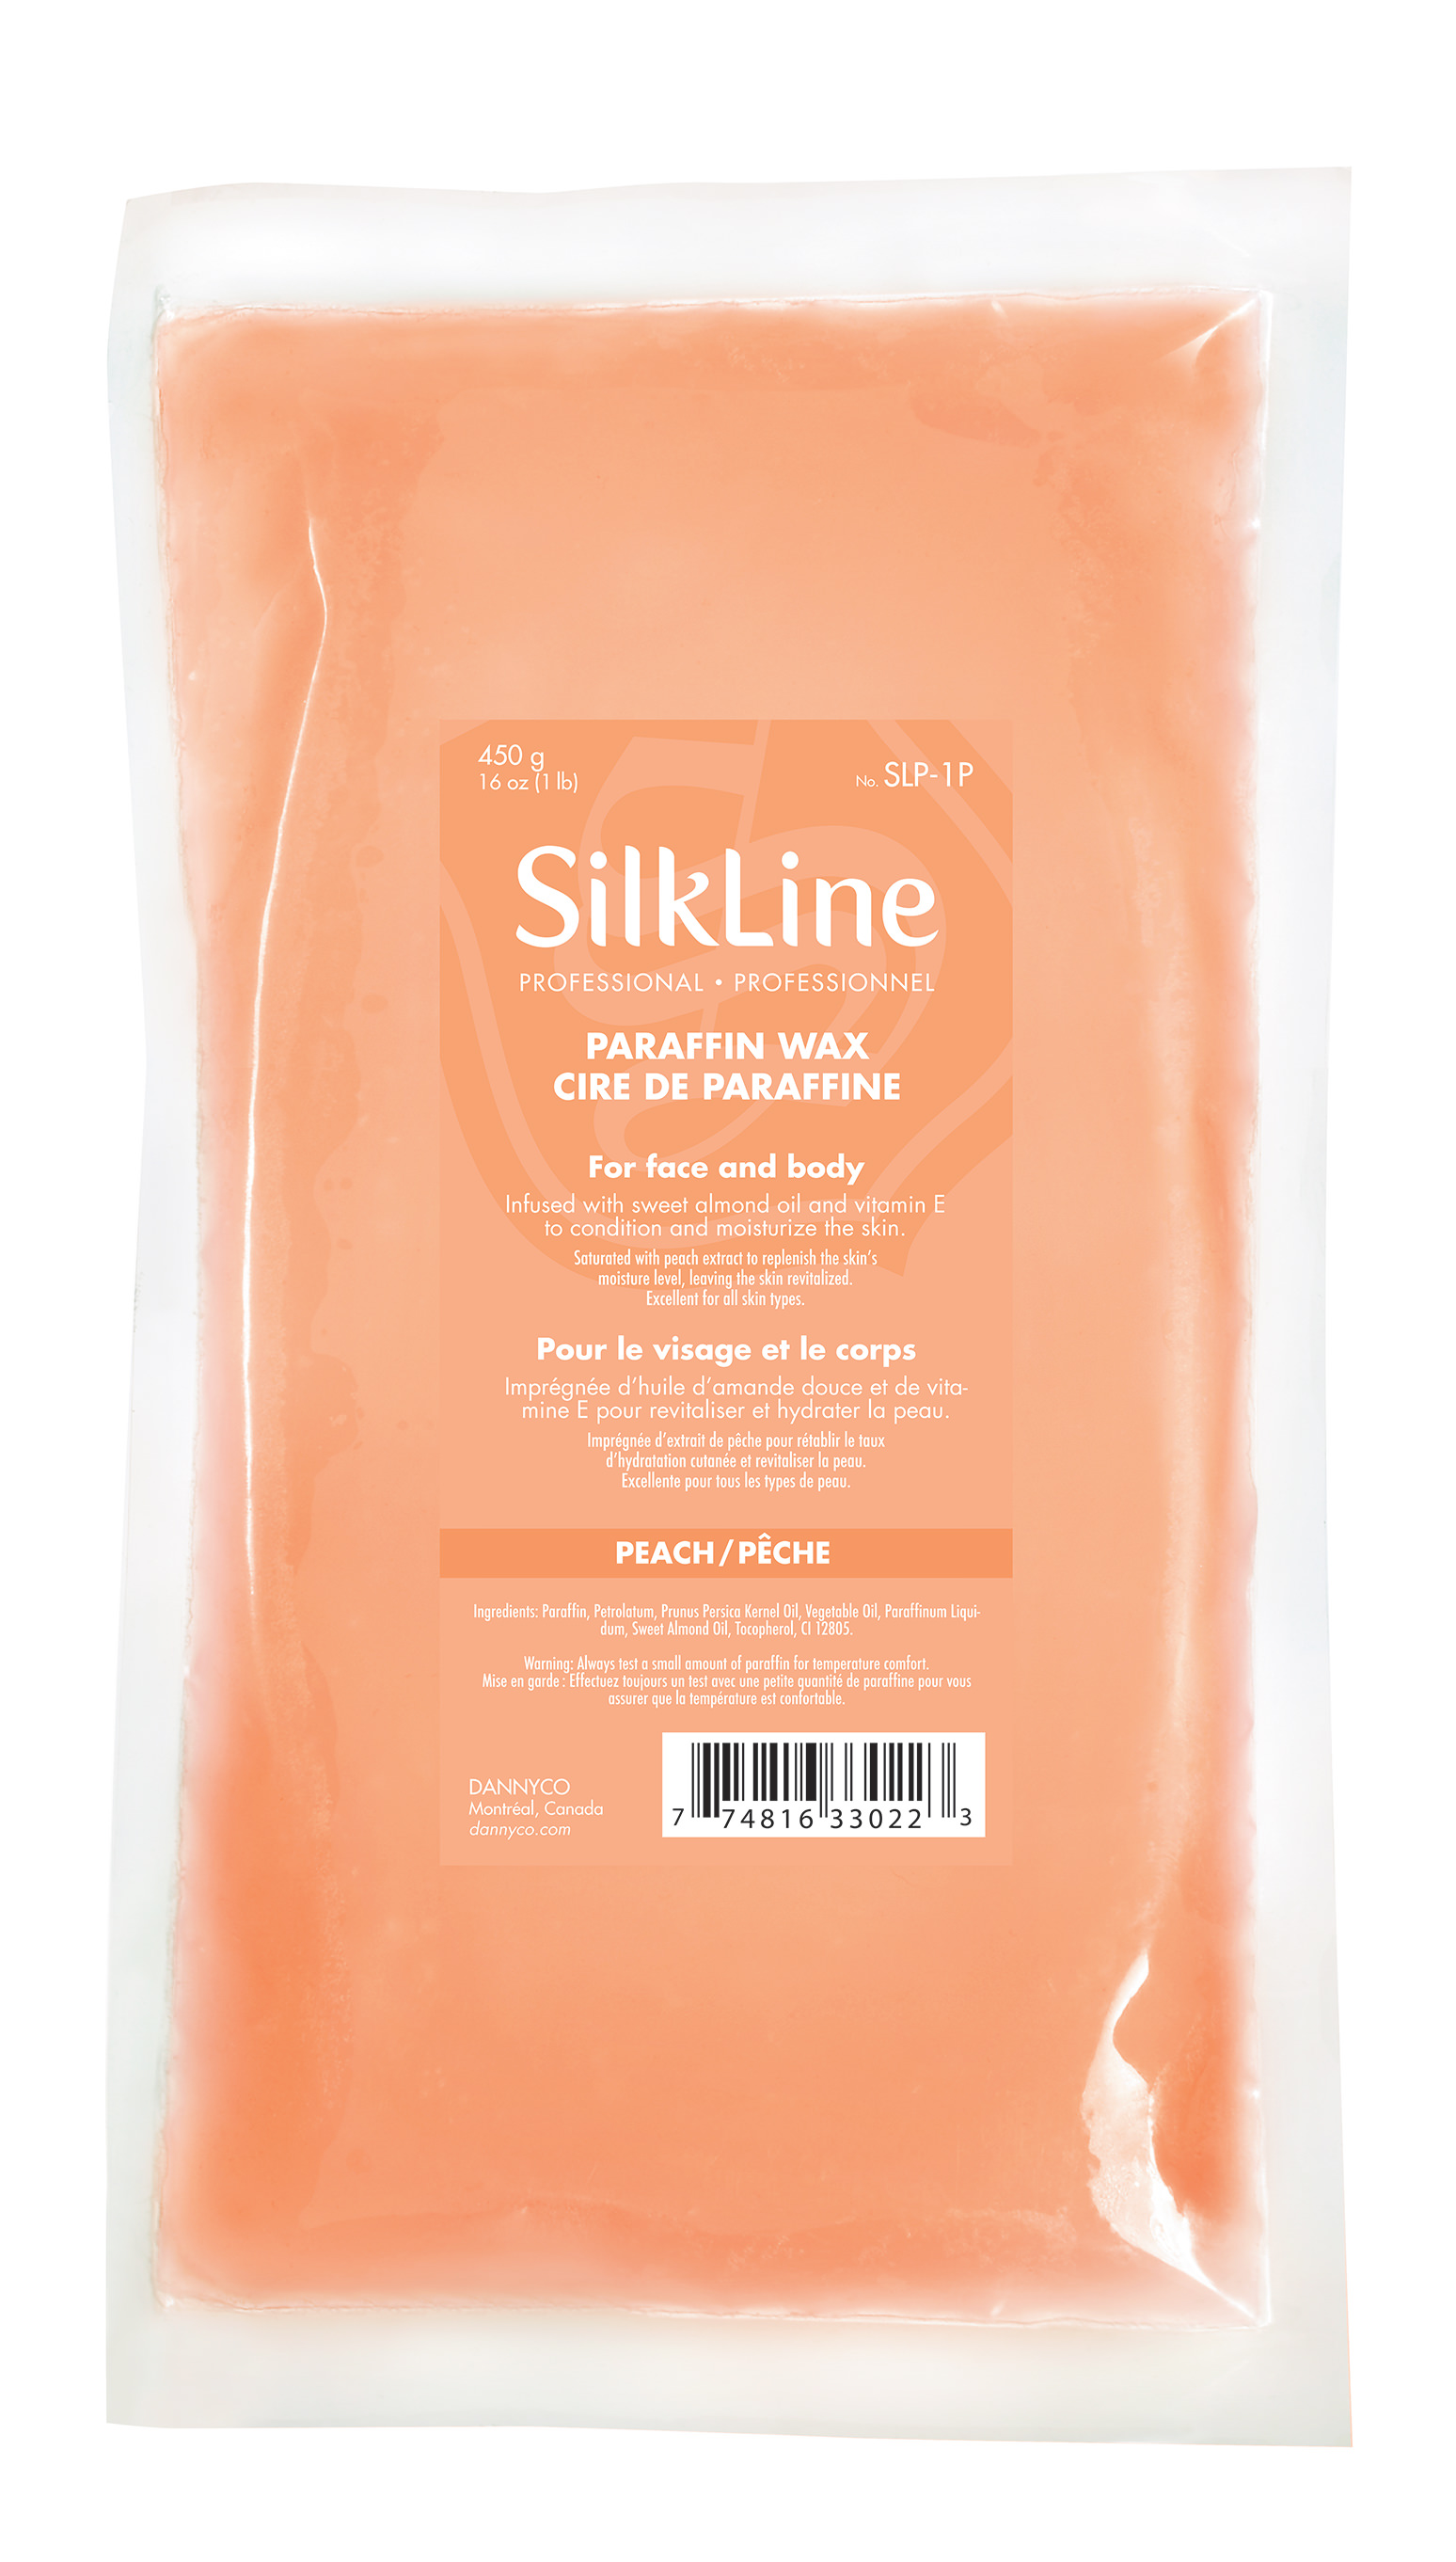 SILKLINE™ PROFESSIONAL PARAFFIN WAX BLOCK TEA TREE 16 oz, FOR FACE AND BODY  - ca-dannyco